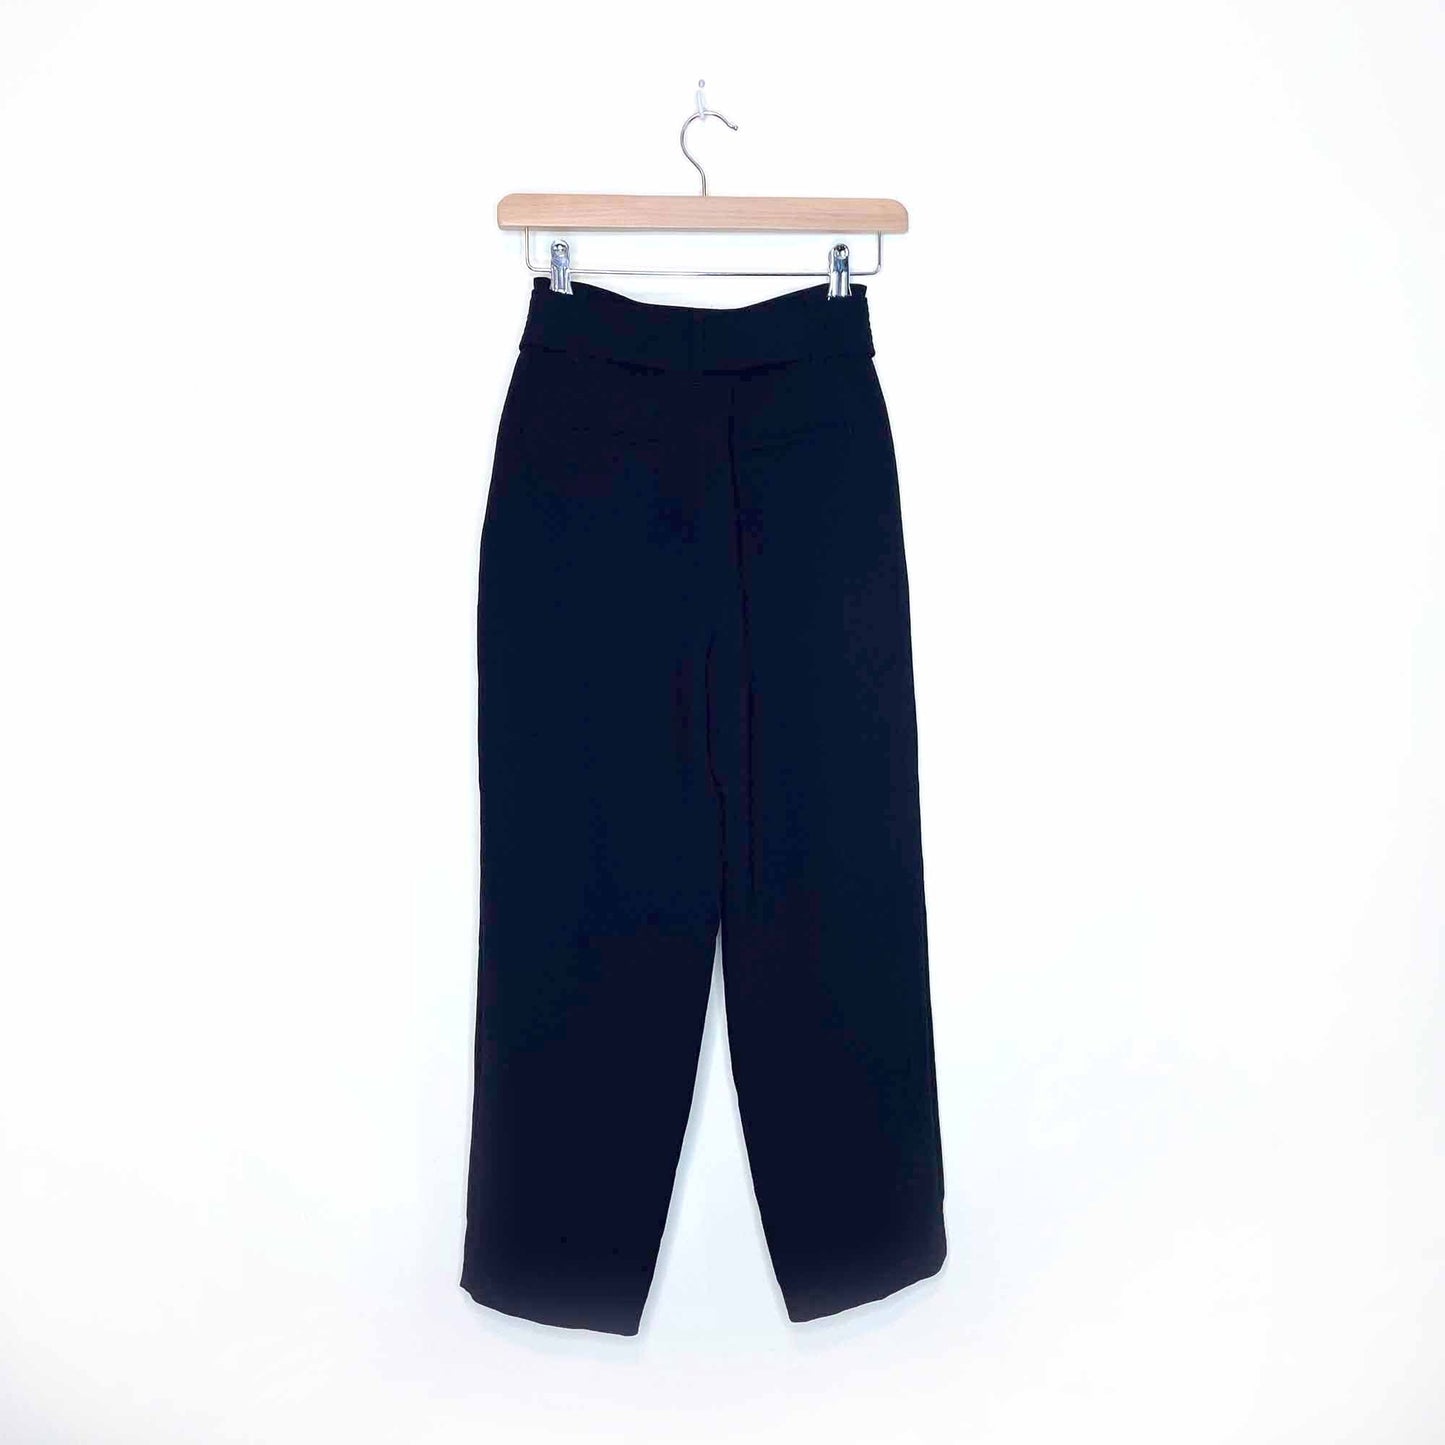 wilfred navy blue tie-front high rise straight leg pant - size 2